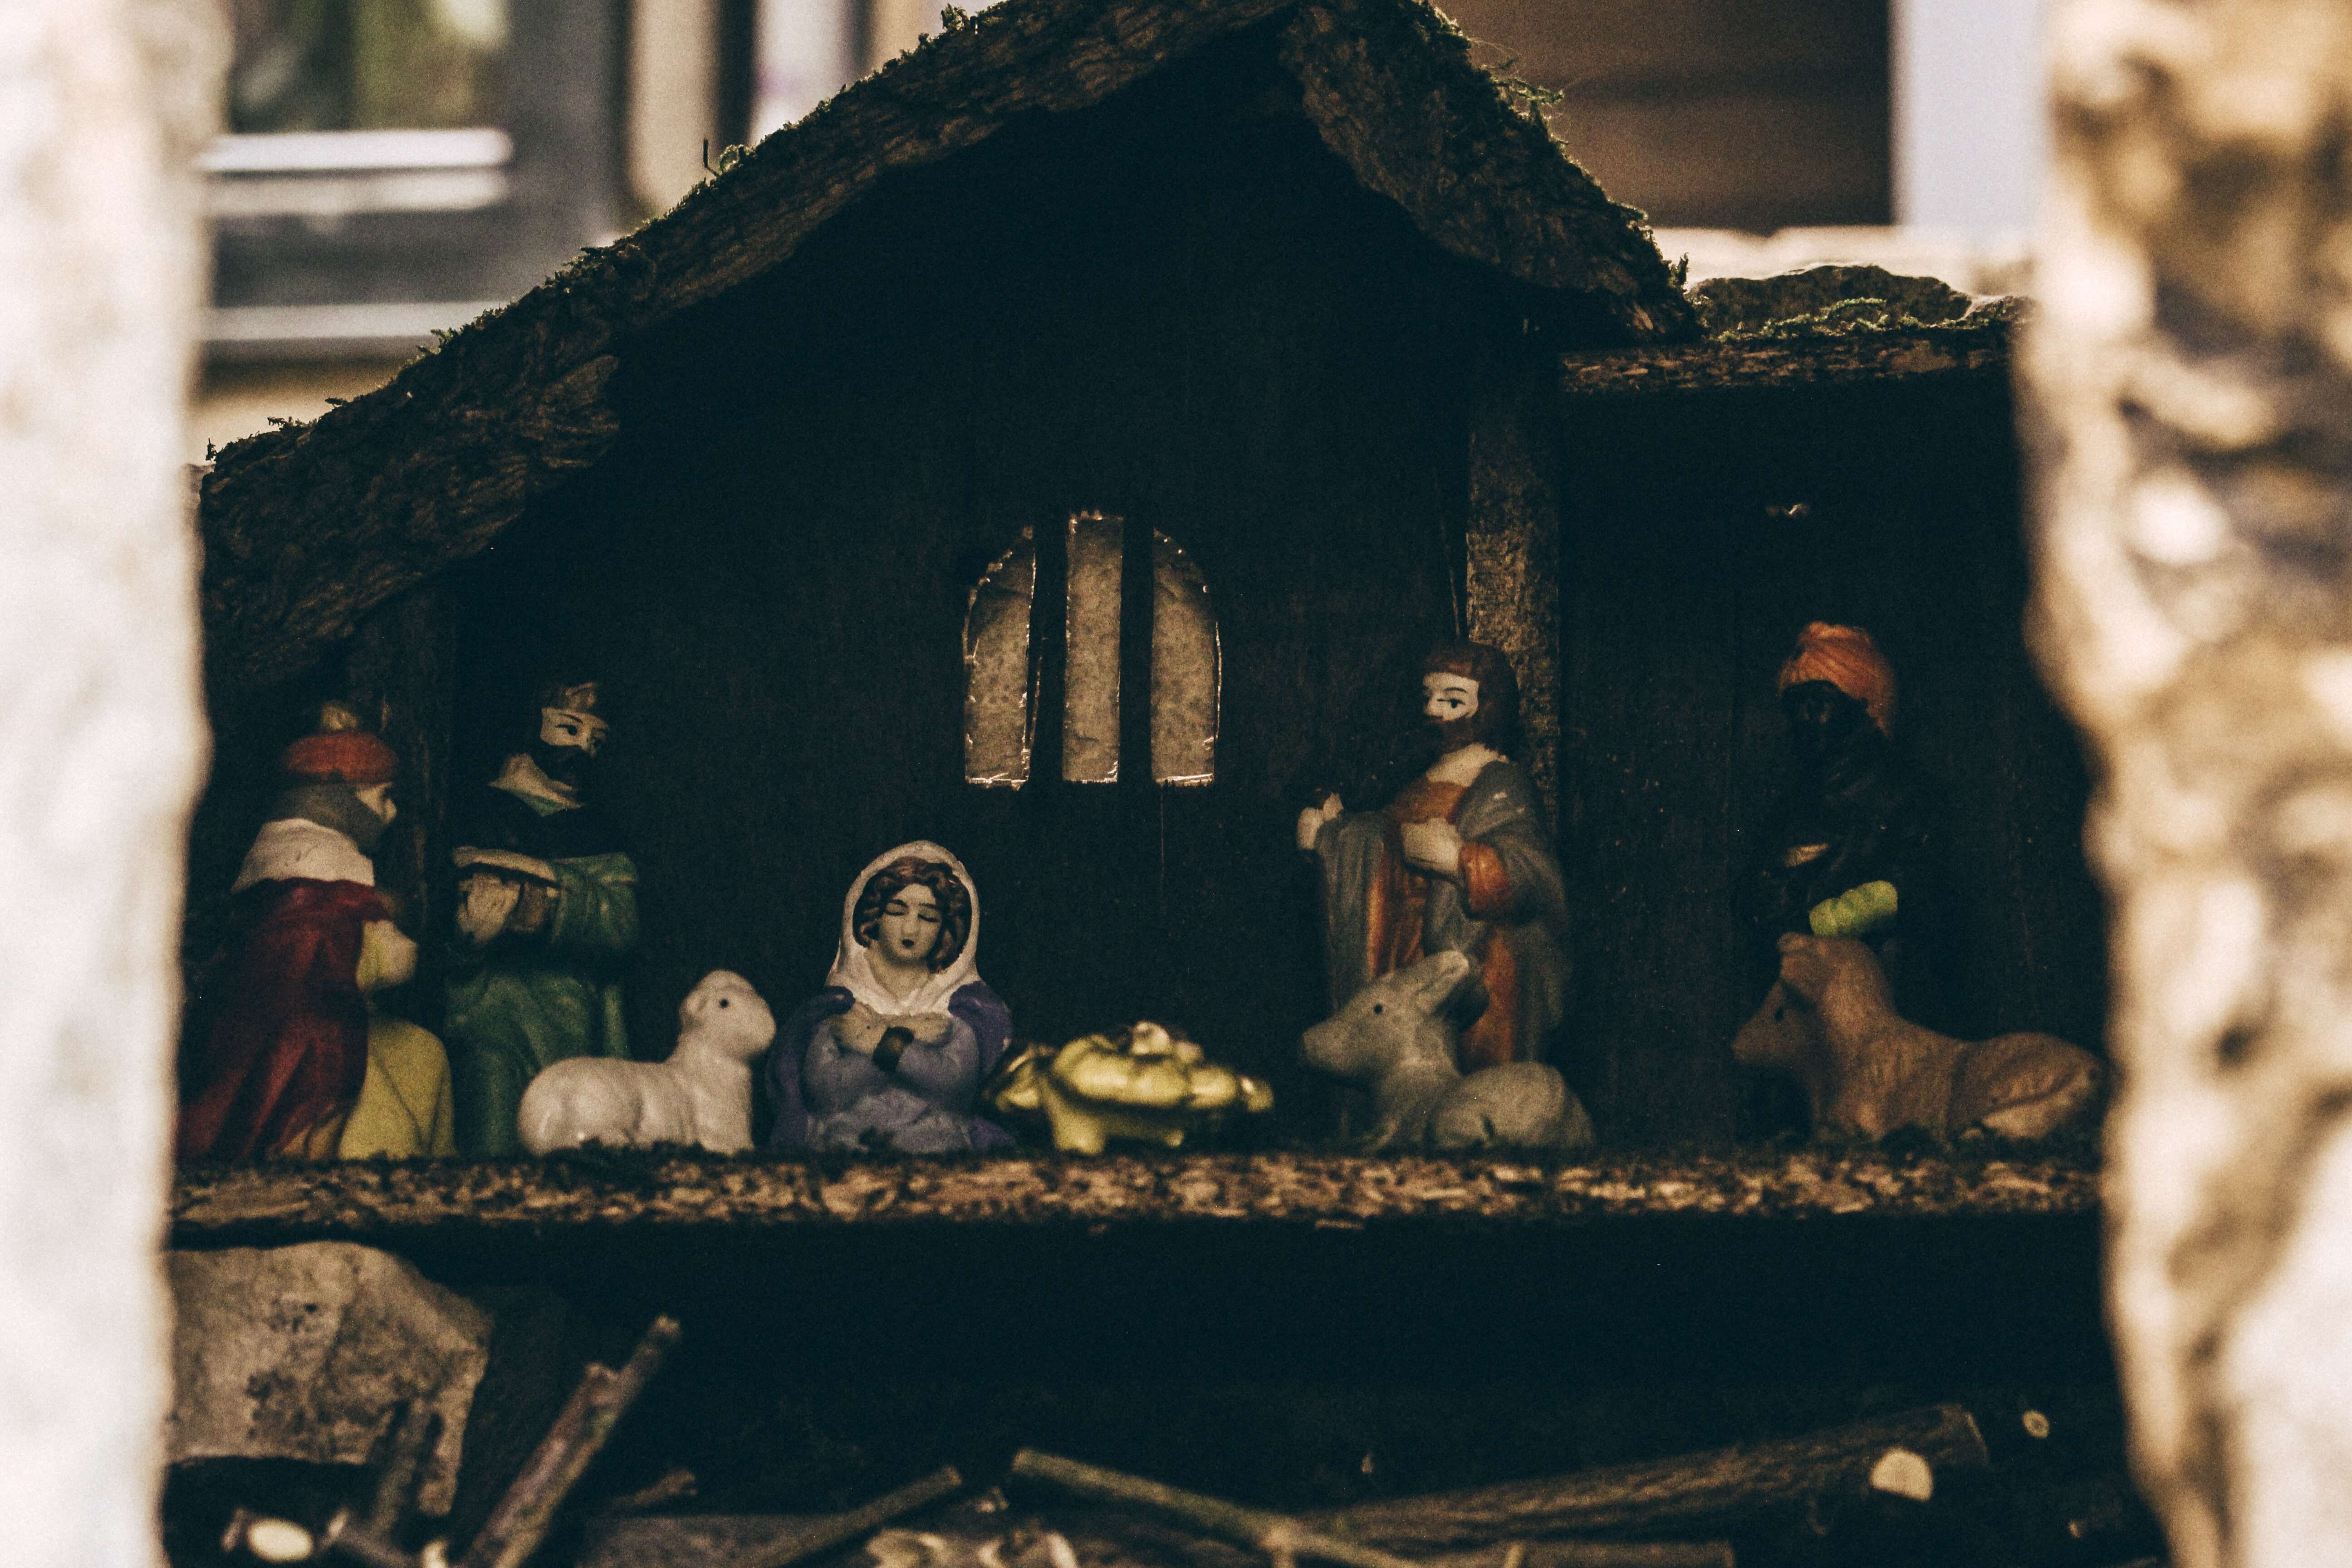 The nativity scene depicts the 3 Kings Spain in the stable with Jesus